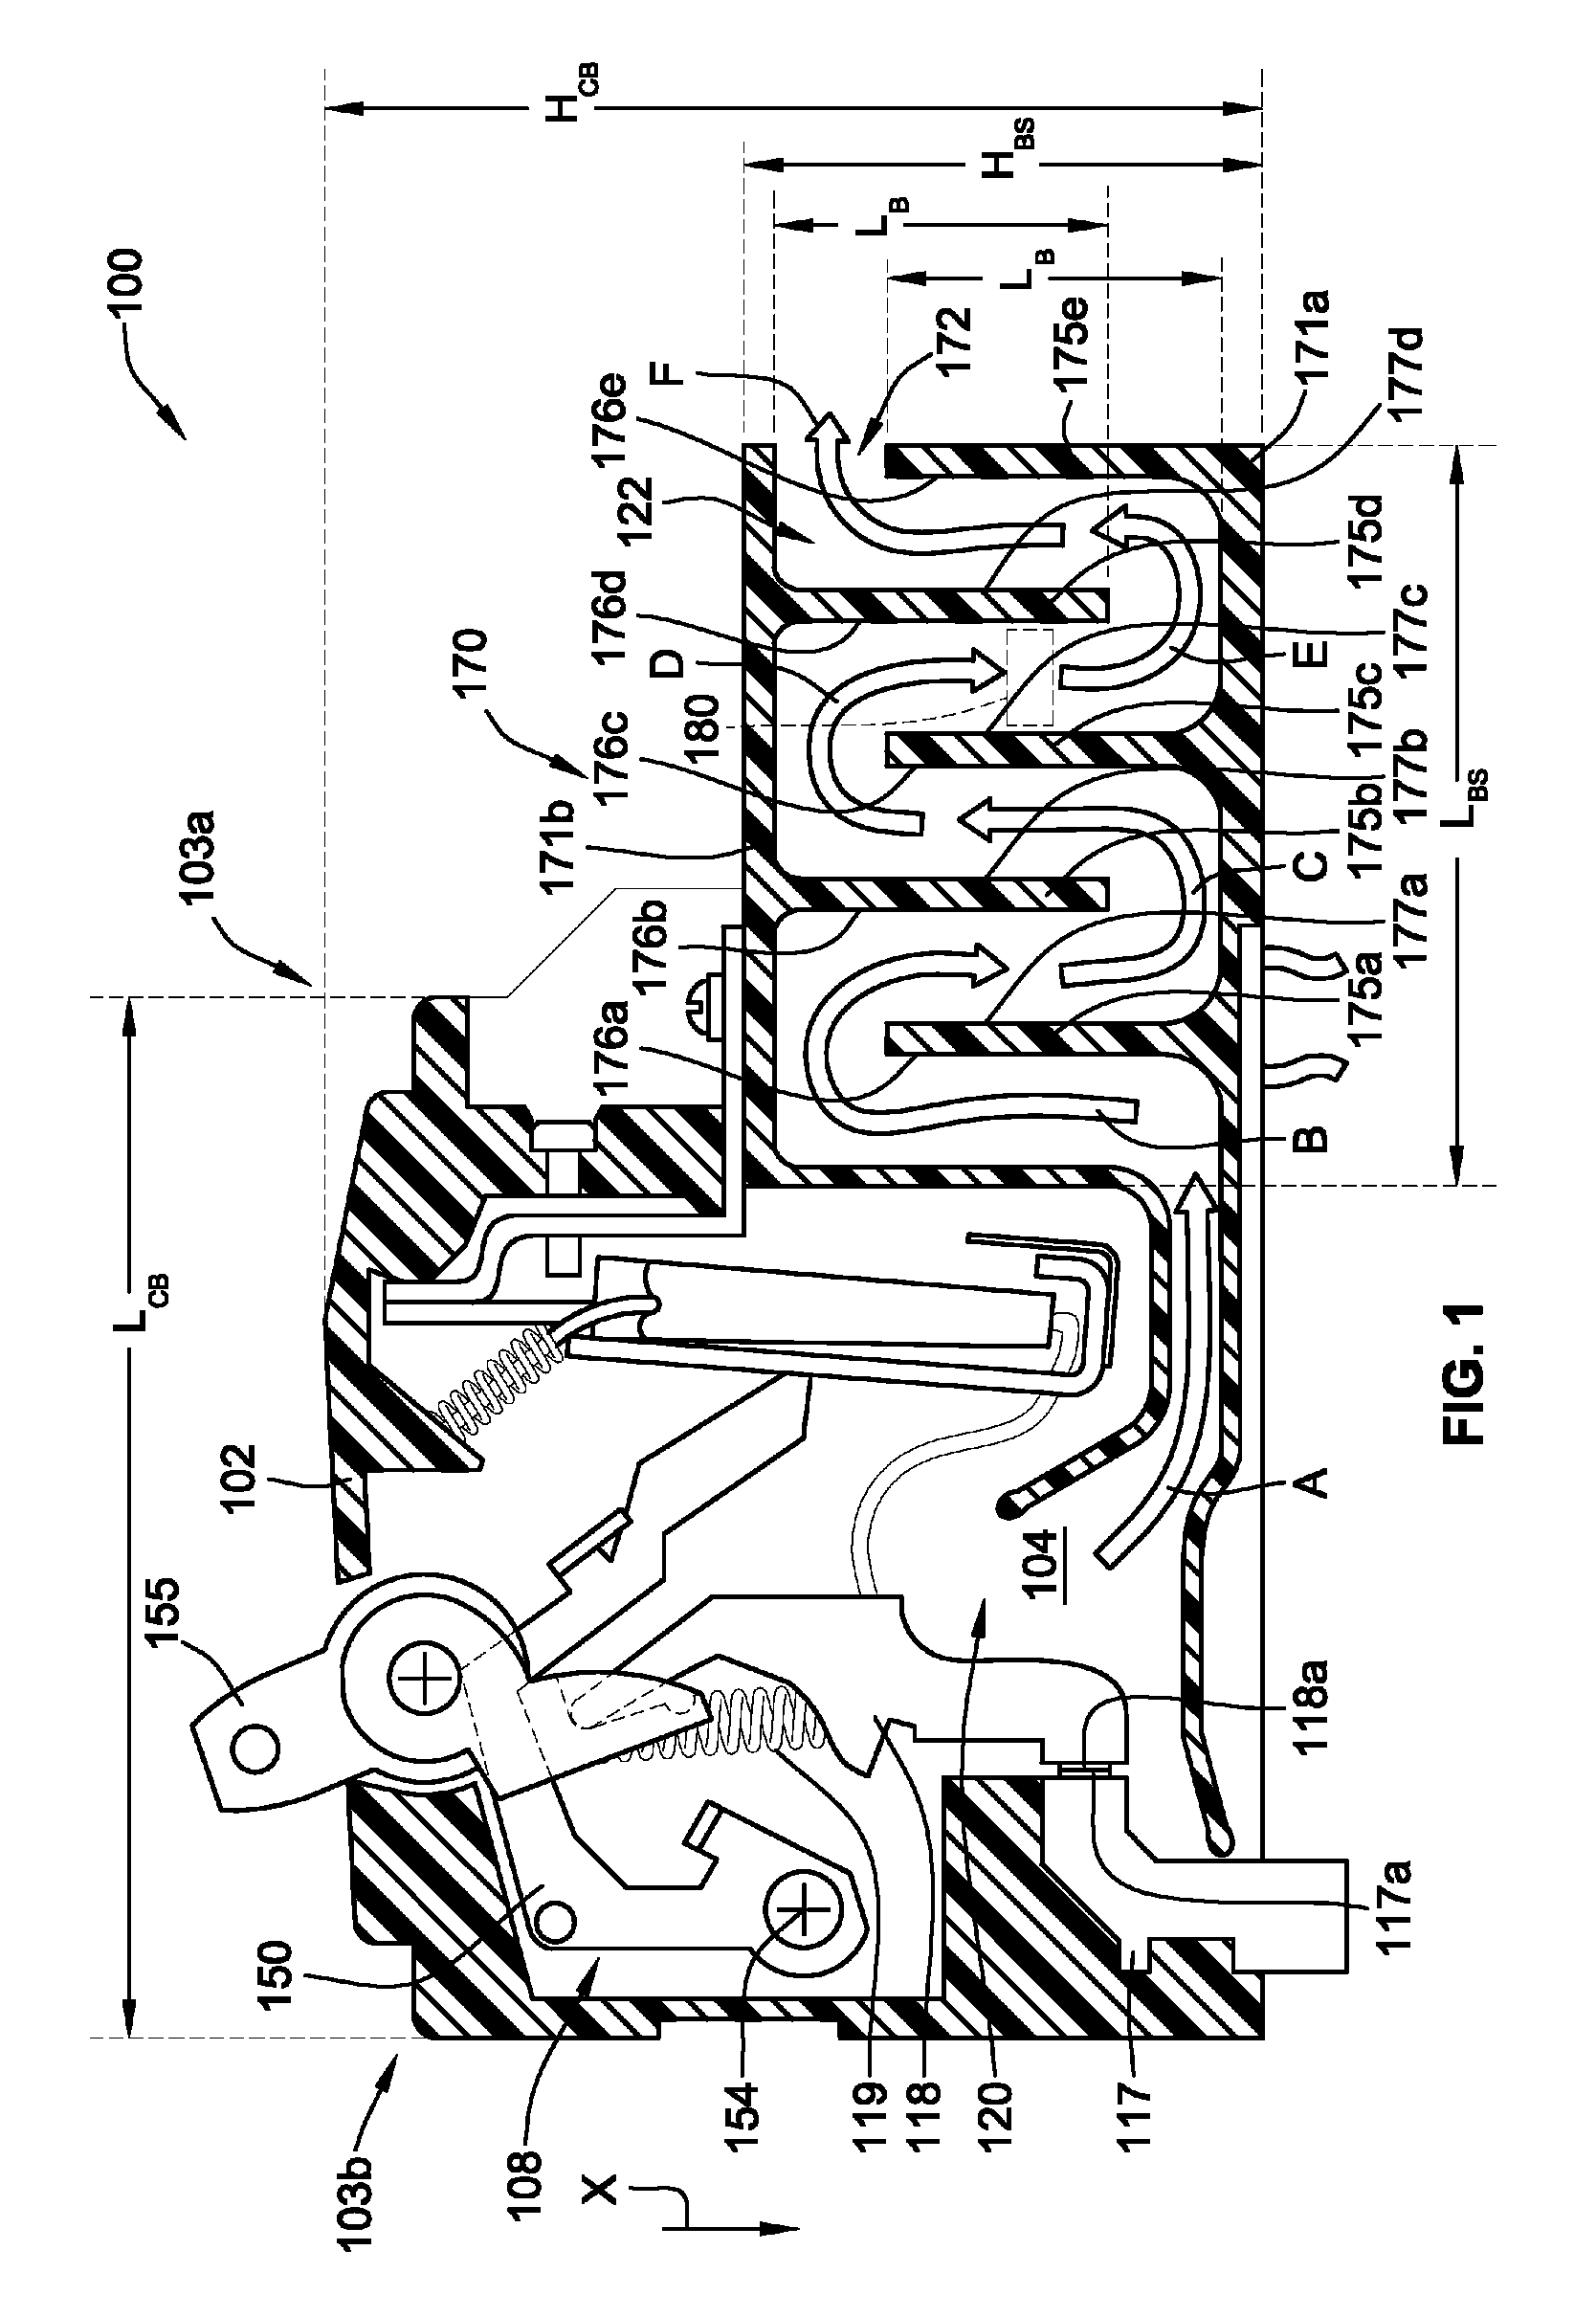 Circuit breaker with controlled exhaust